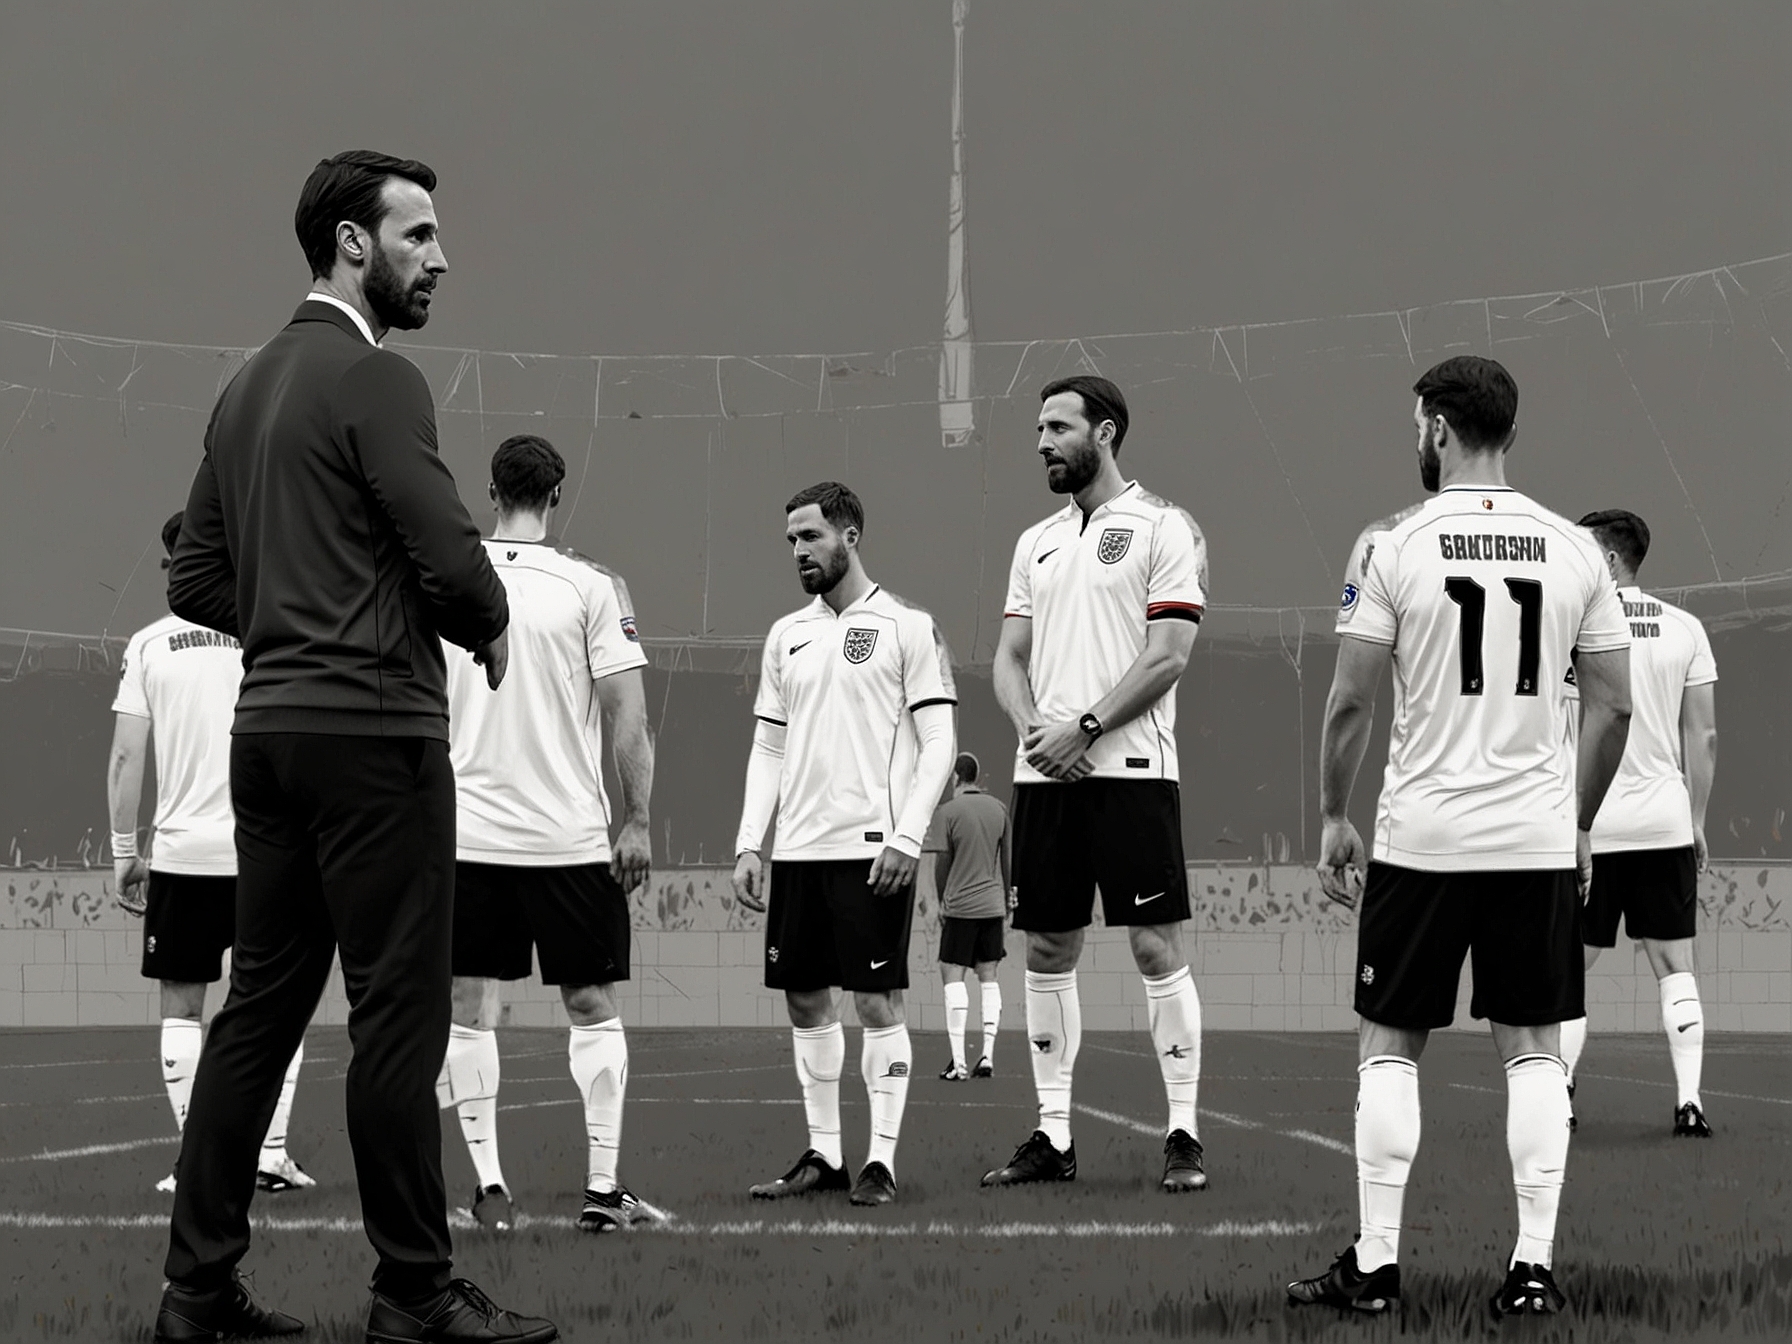 An intense moment during an England training session, as Gareth Southgate demonstrates tactics to his players. The image captures the focus and determination ahead of Euro 2024.